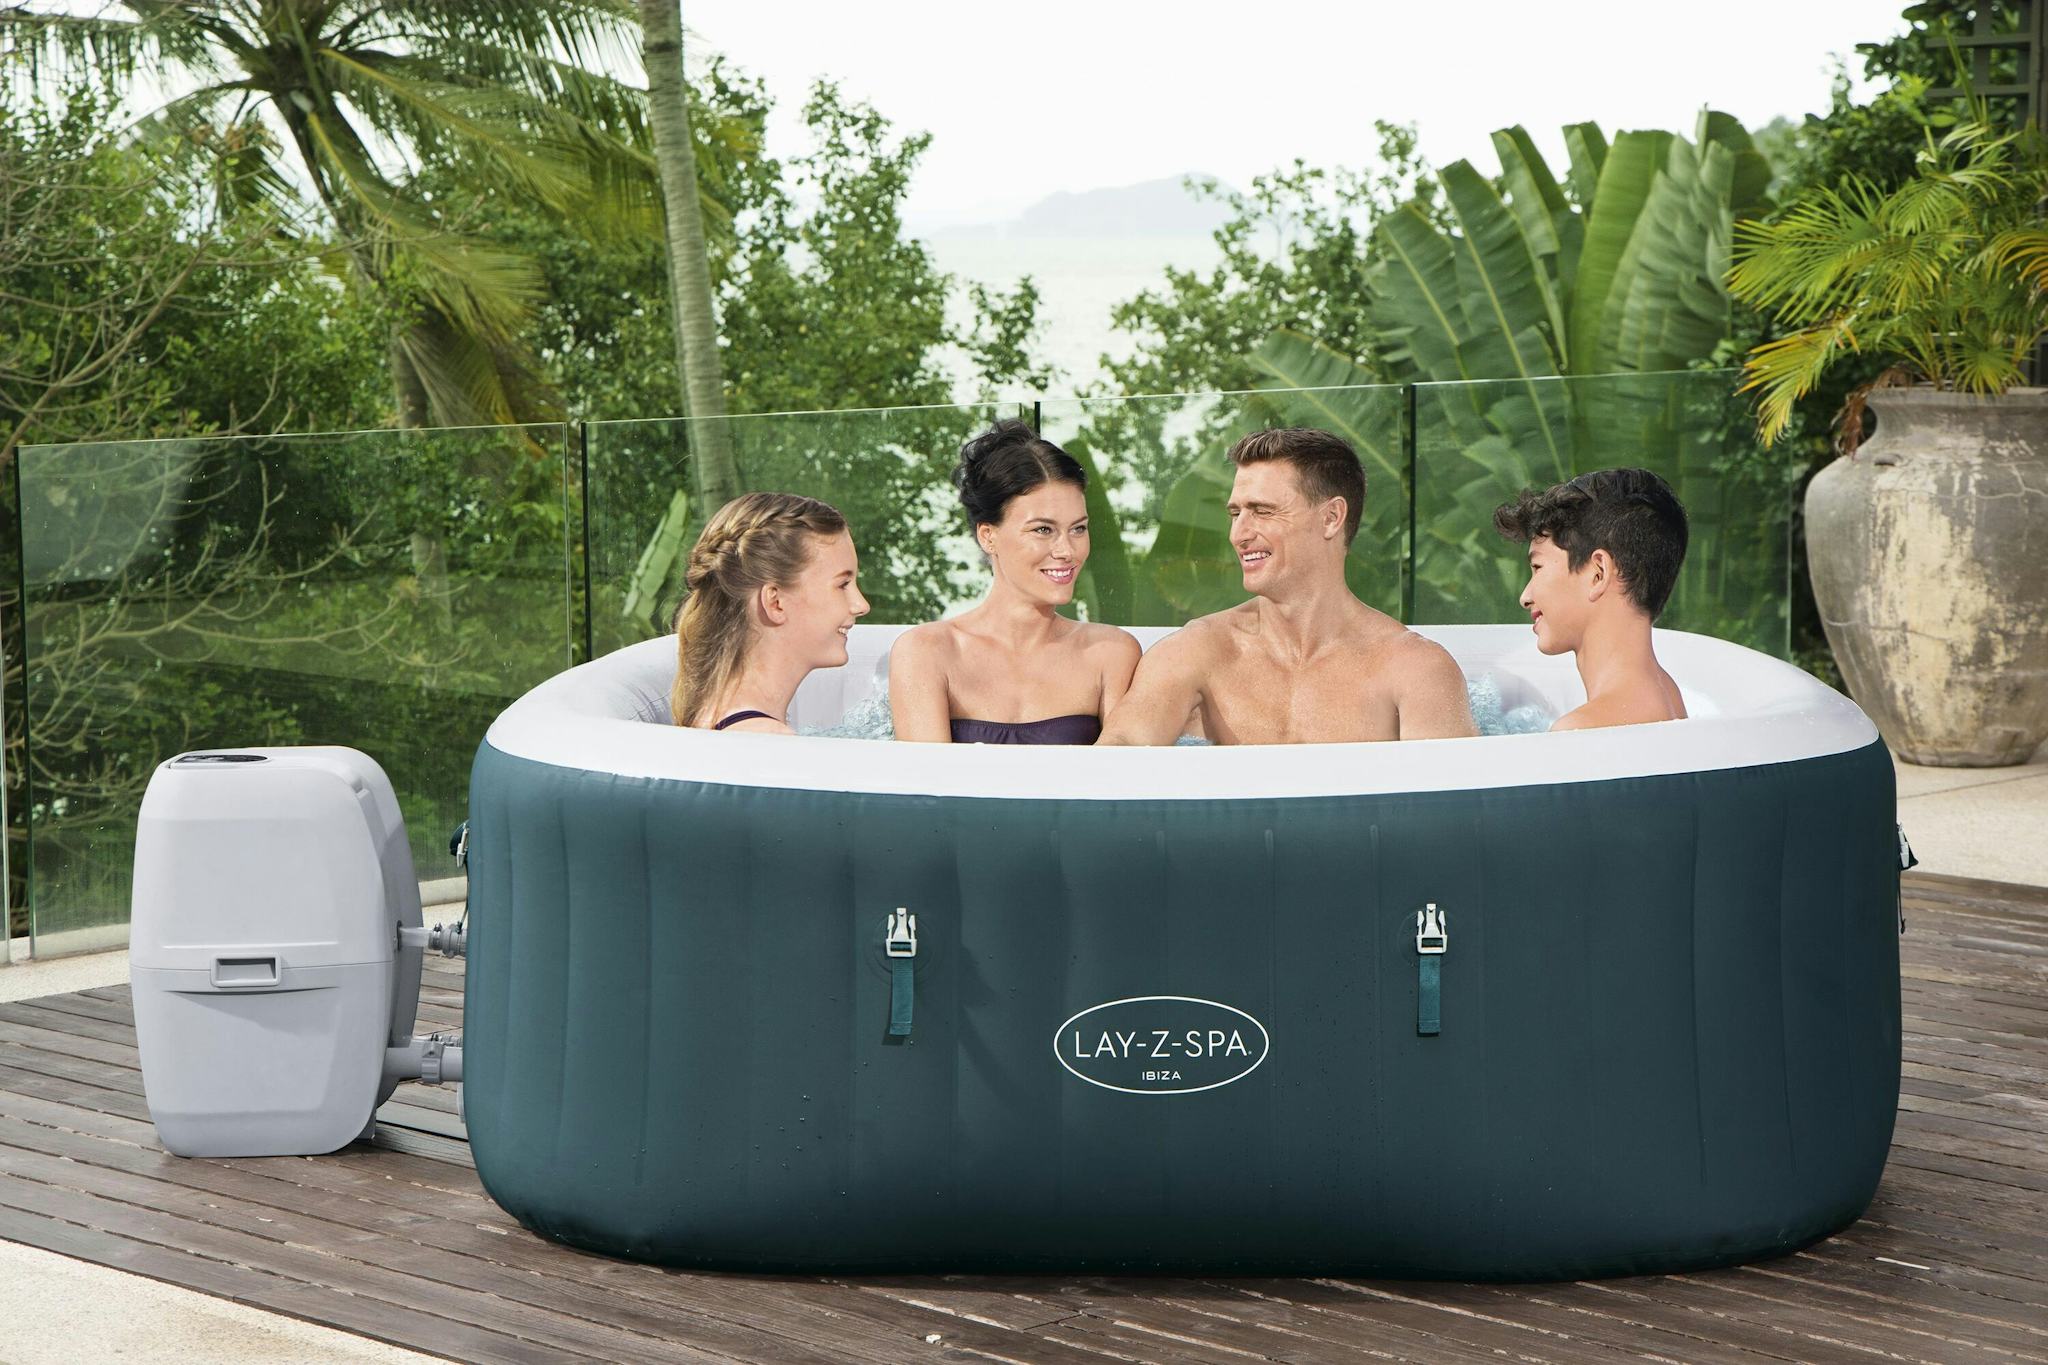 Spas Gonflables Spa gonflable carré Lay-Z-Spa Ibiza Airjet™ 4 - 6 personnes Bestway 14